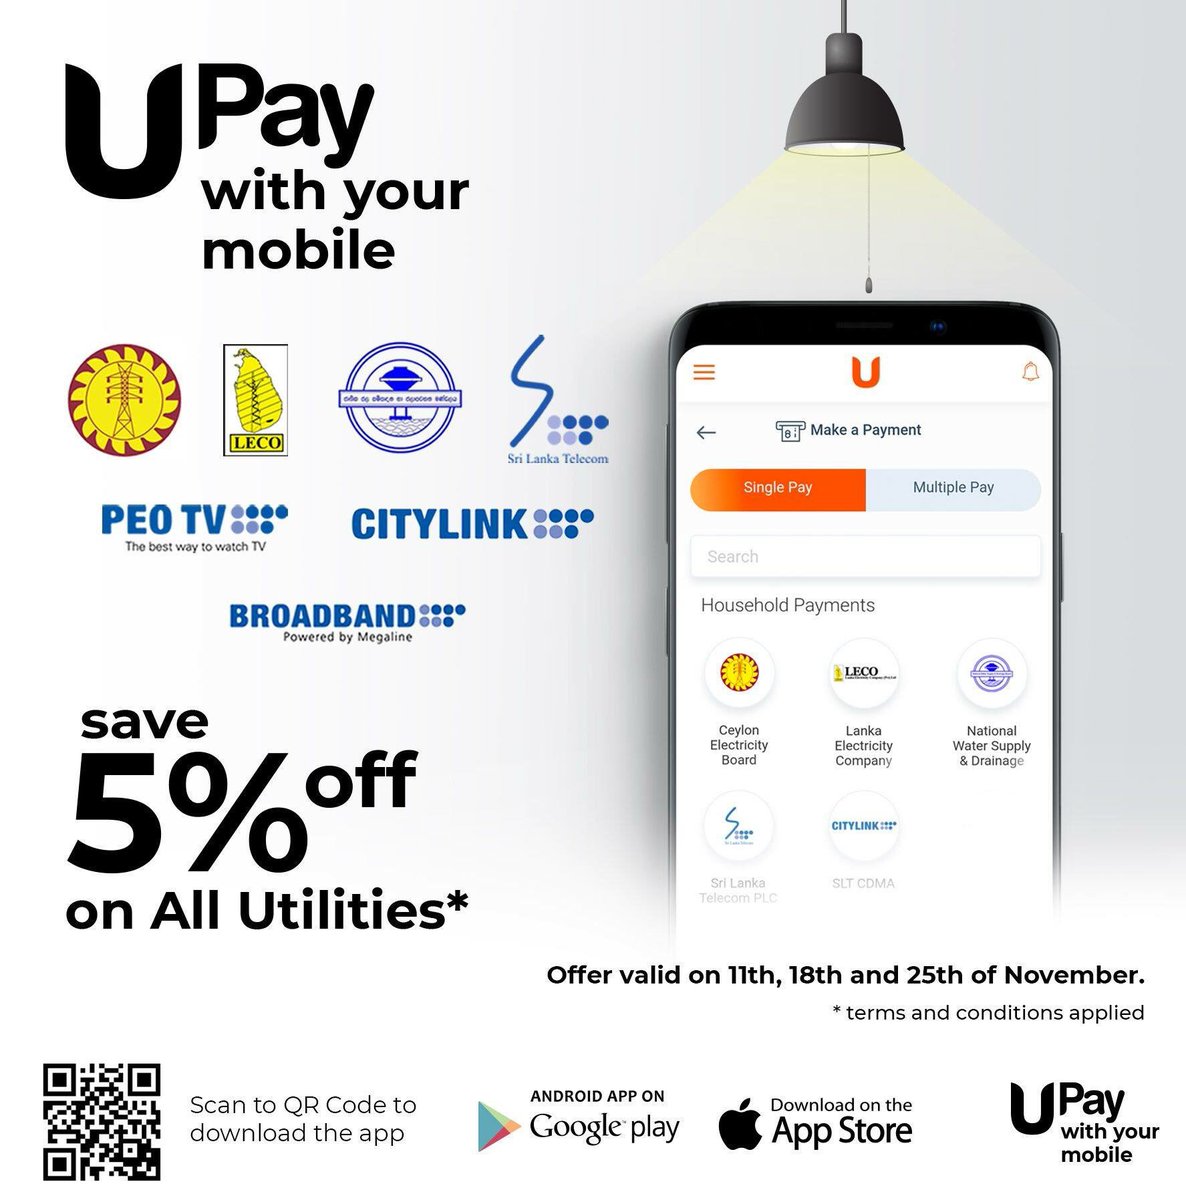 Upay On Twitter Stay On Top Of Your Utility Bill Payments With Upay Pay All Your Ceb Leco Water And Slt Bills In Mere Seconds Through Your Smartphone Utilities Electricity Slt Lka